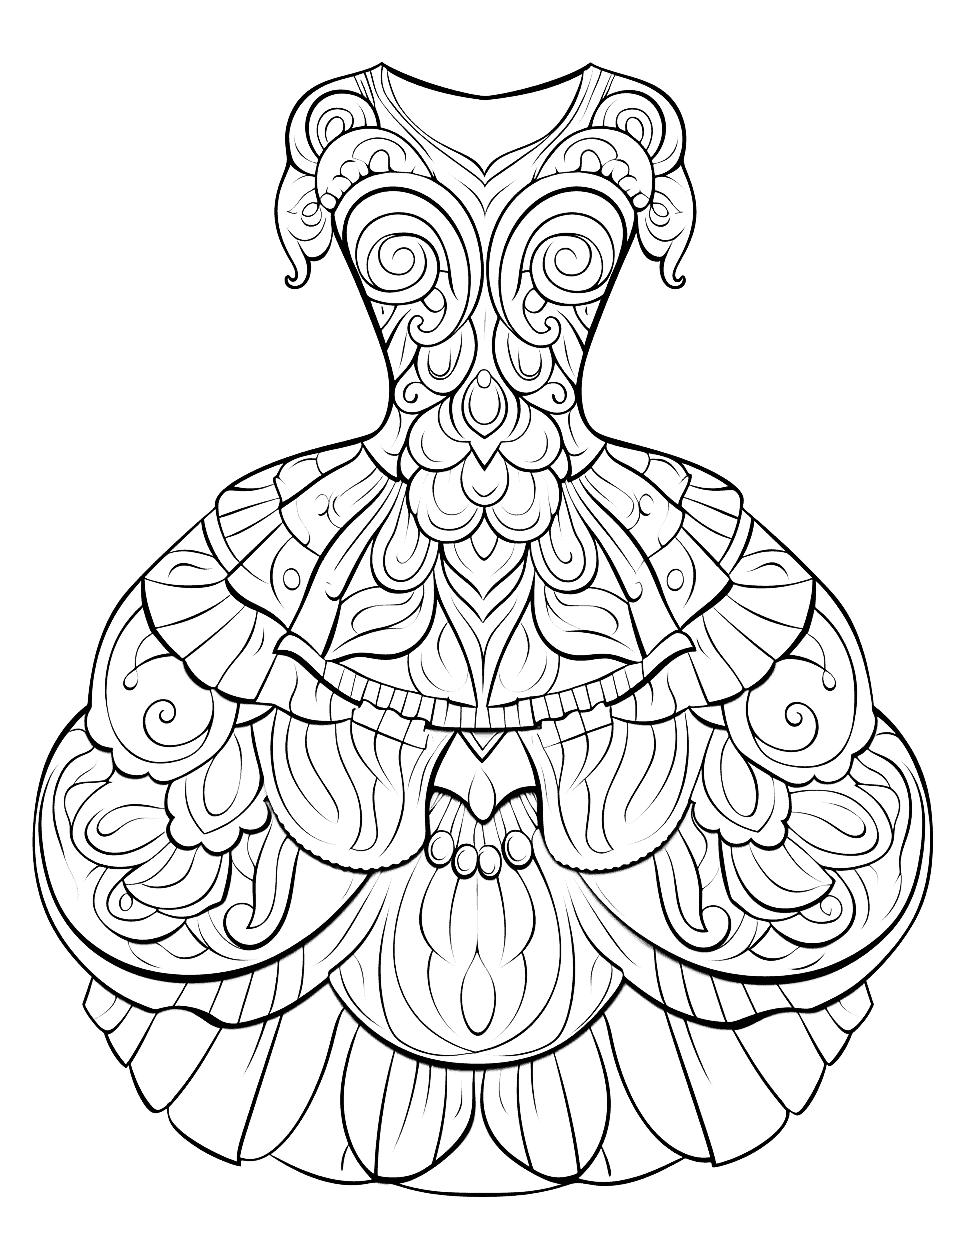 Fashion Mandala Adult Coloring Page - A difficult mandala coloring page in the shape of a beautiful dress.